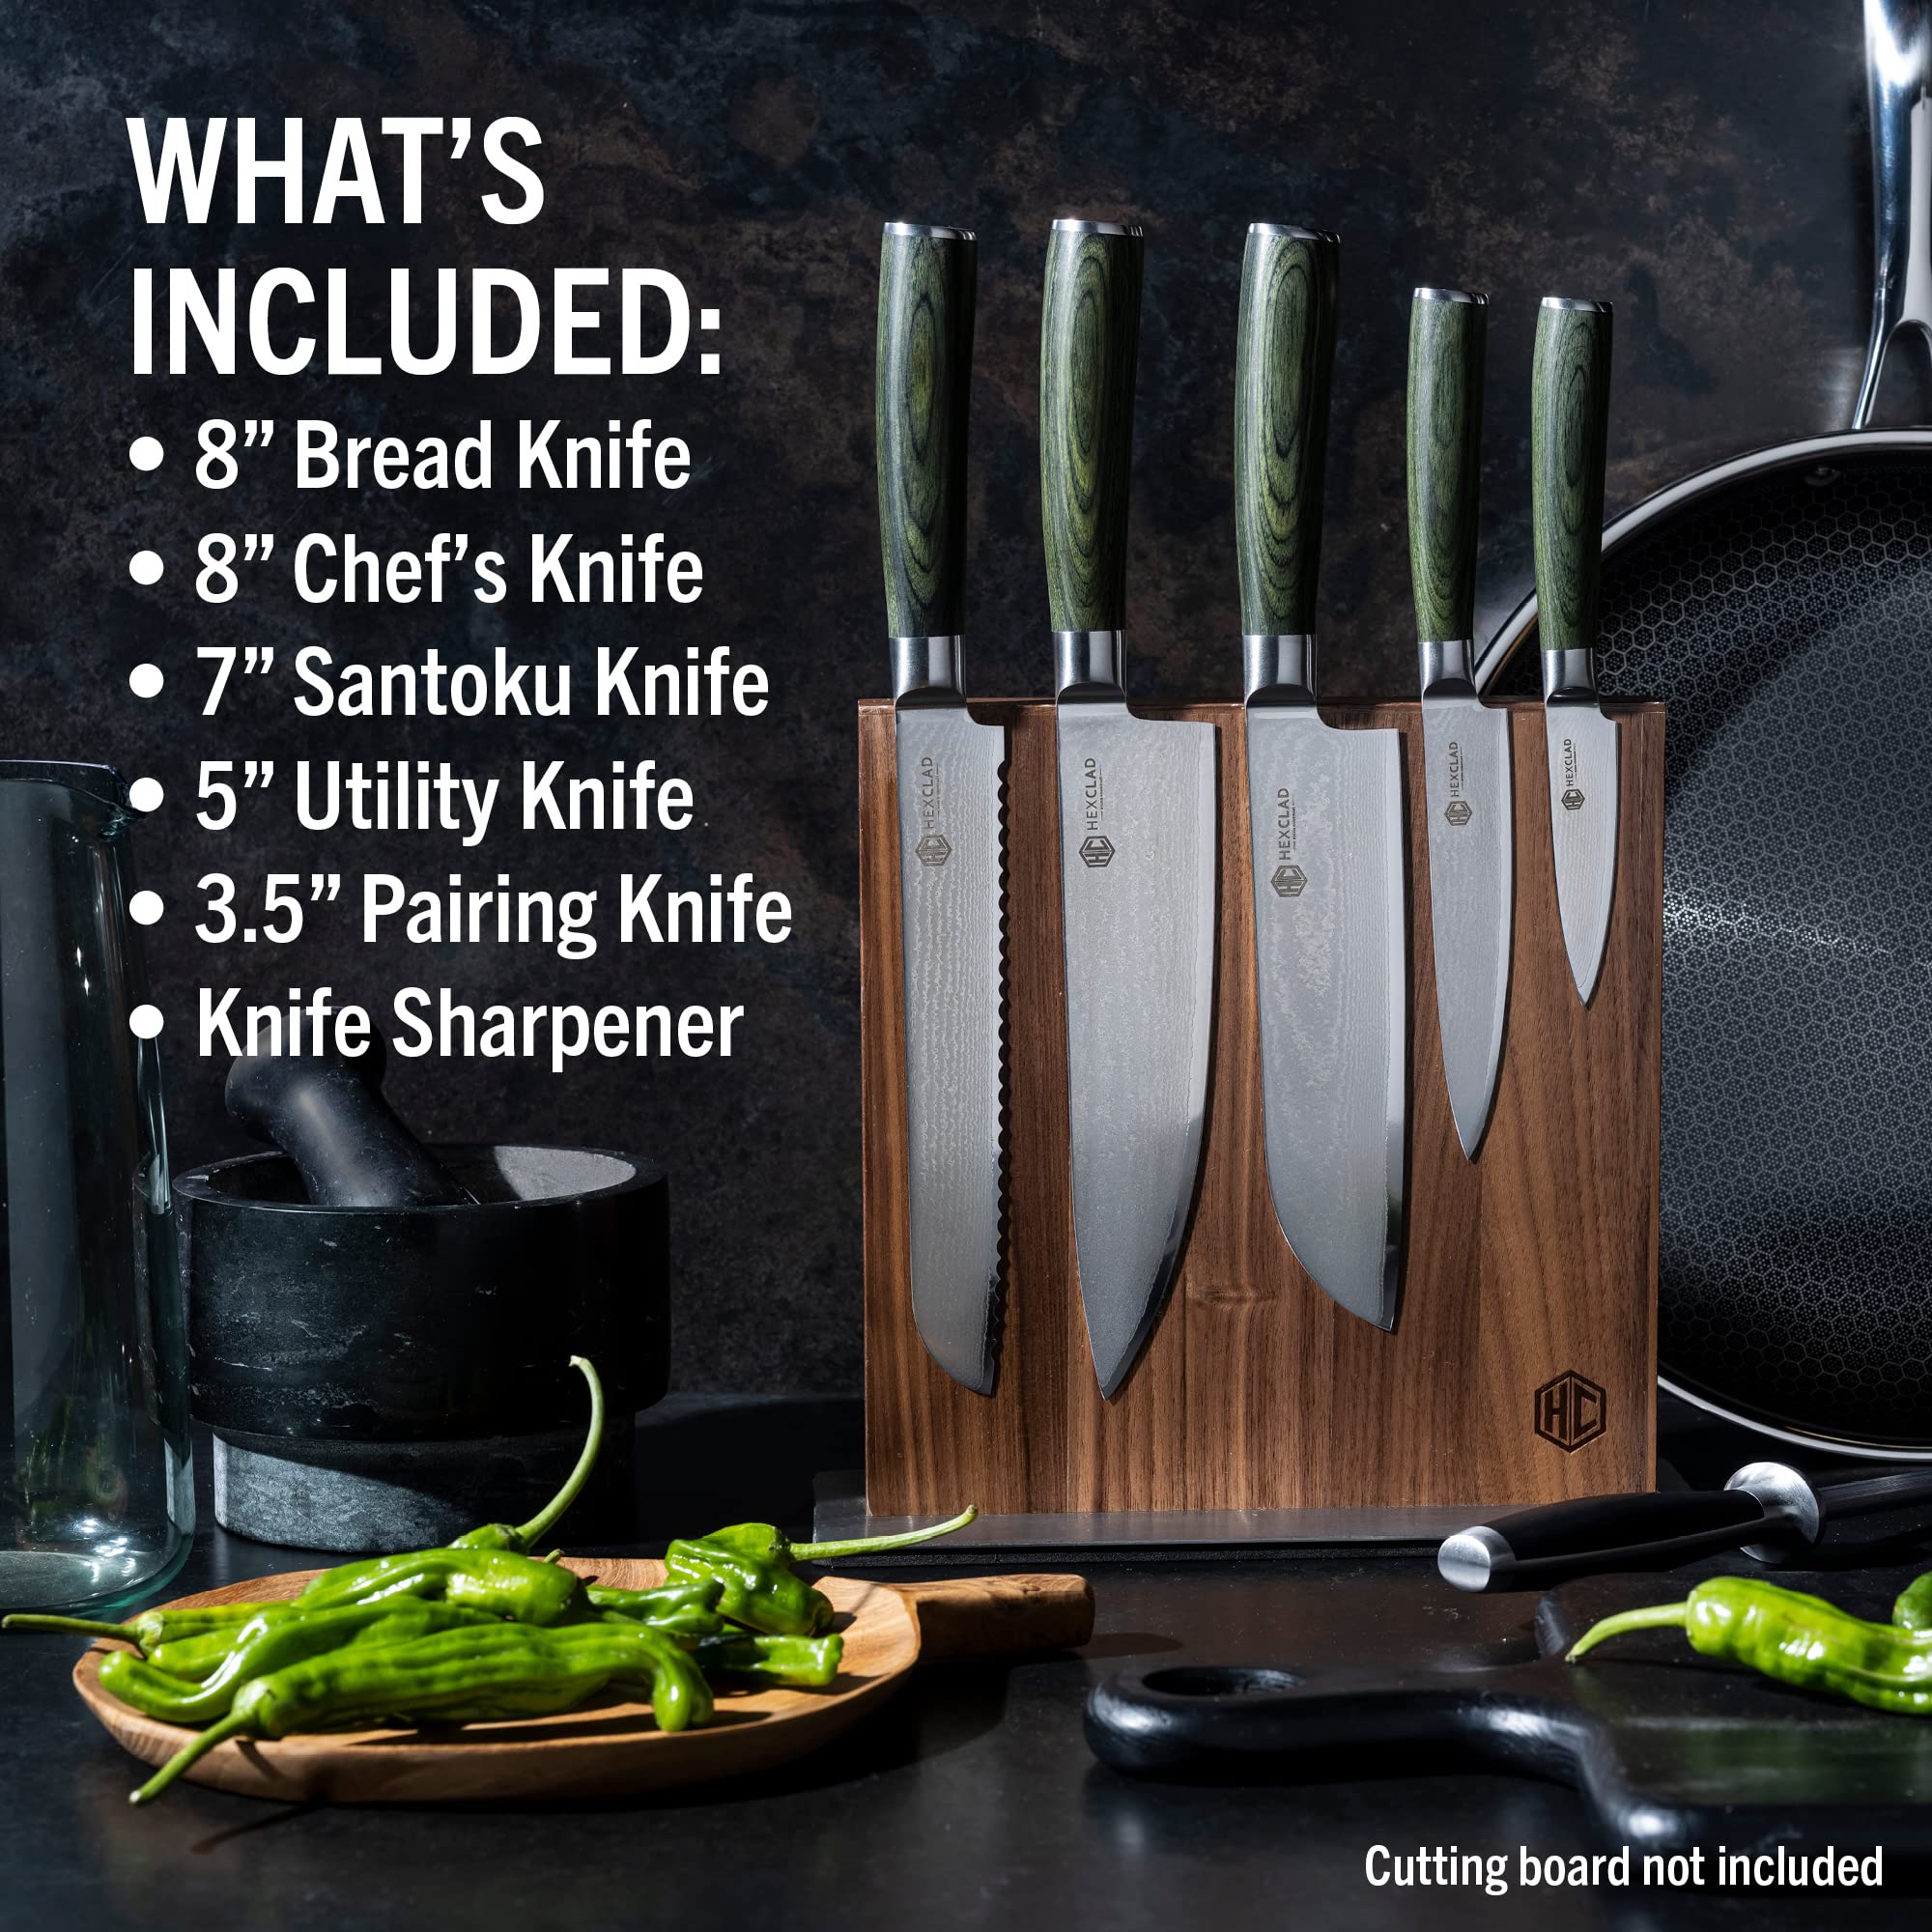 HexClad 10 Piece Knife Set - 4 piece Steak Knives and 6 Piece Essential Knife Set, Fine Edge, Non-Serrated, 60 Rockwell Rating, Forest Green Pakkawood Handles